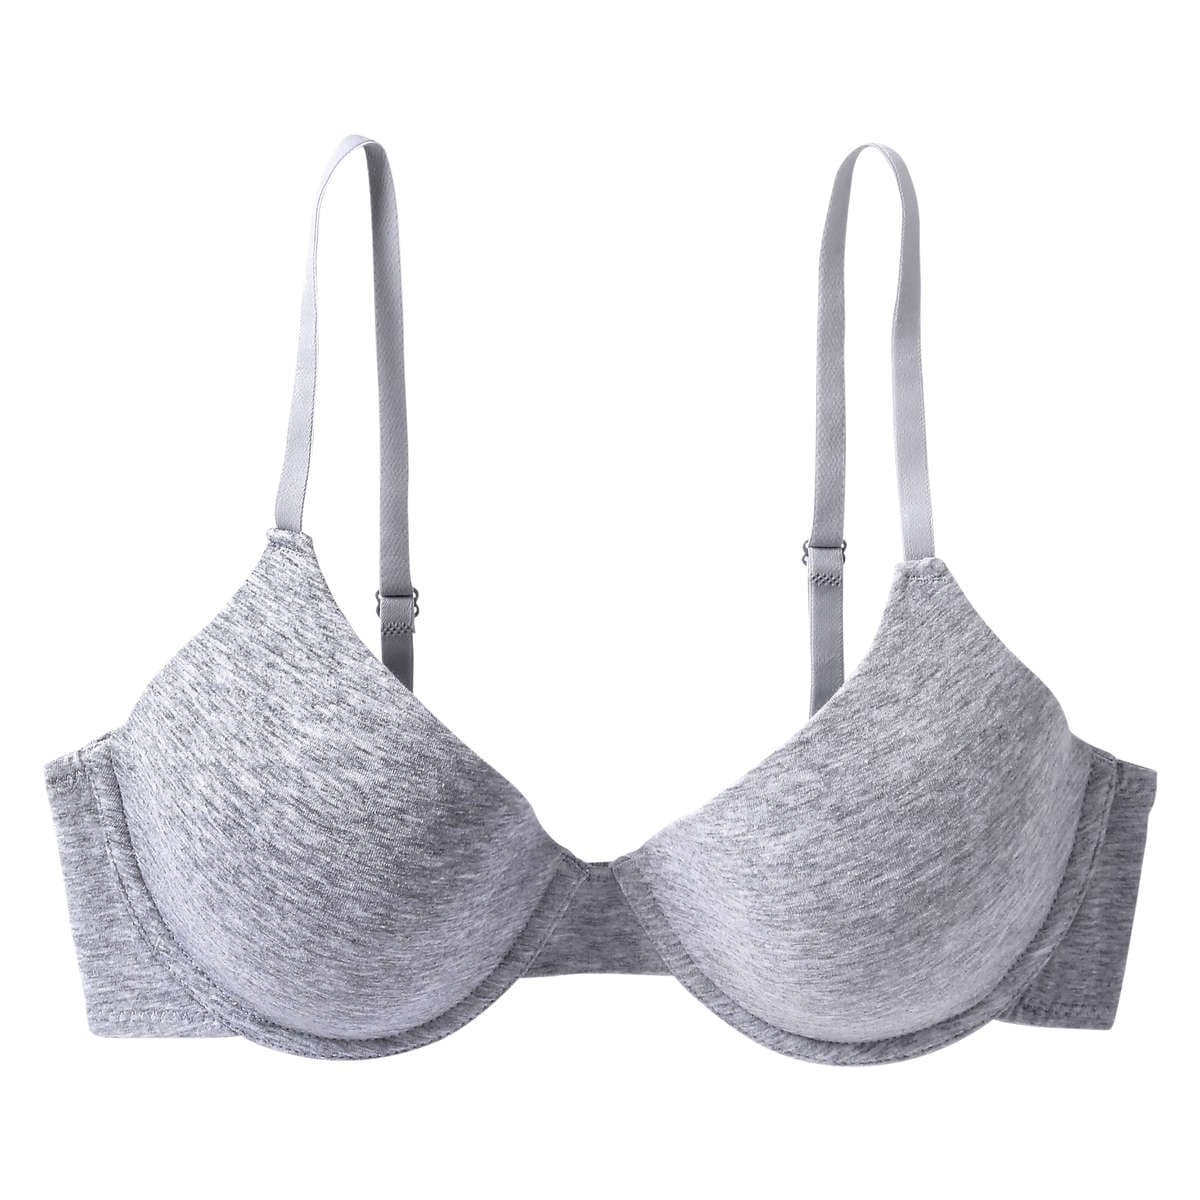 Buy Candour London Padded Wired Full Coverage T-Shirt Bra-Grey for